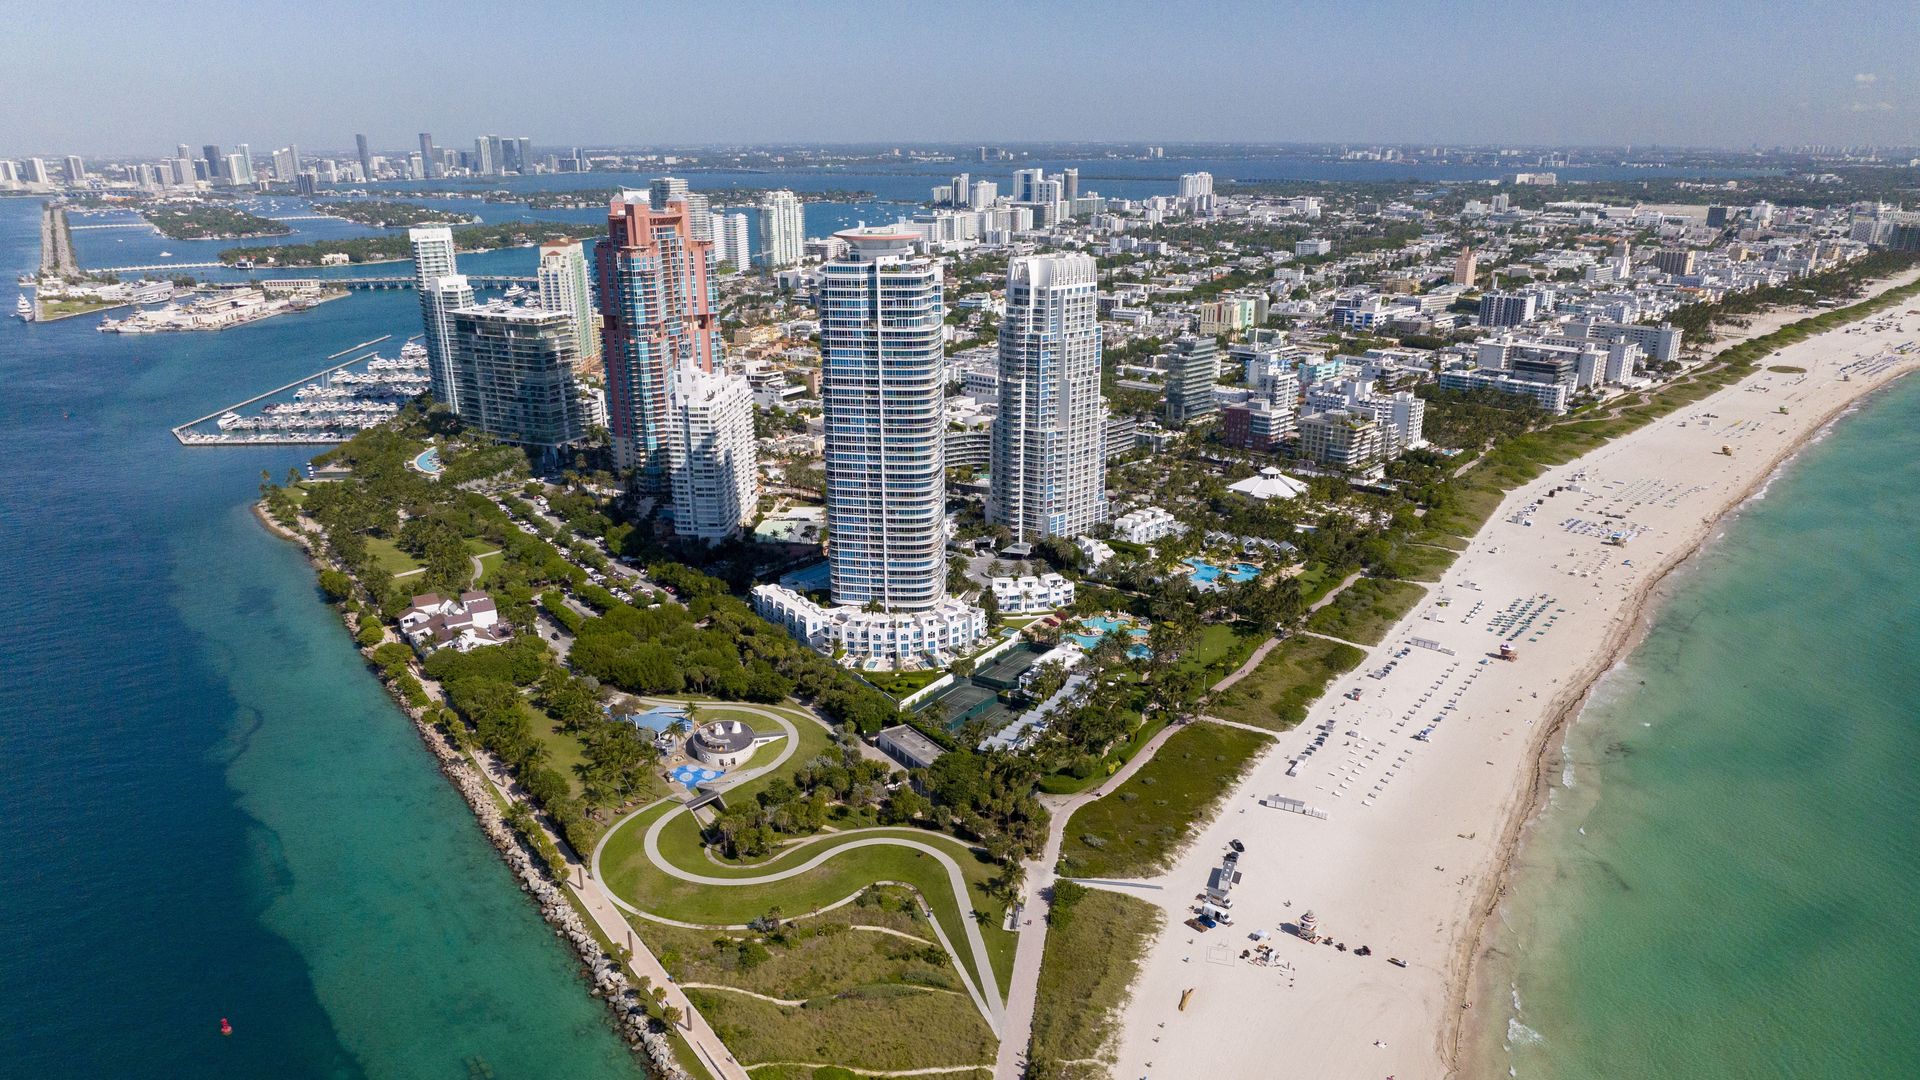 An aerial image shows a park and tall condominiums, as seen from a drone in the sky. 